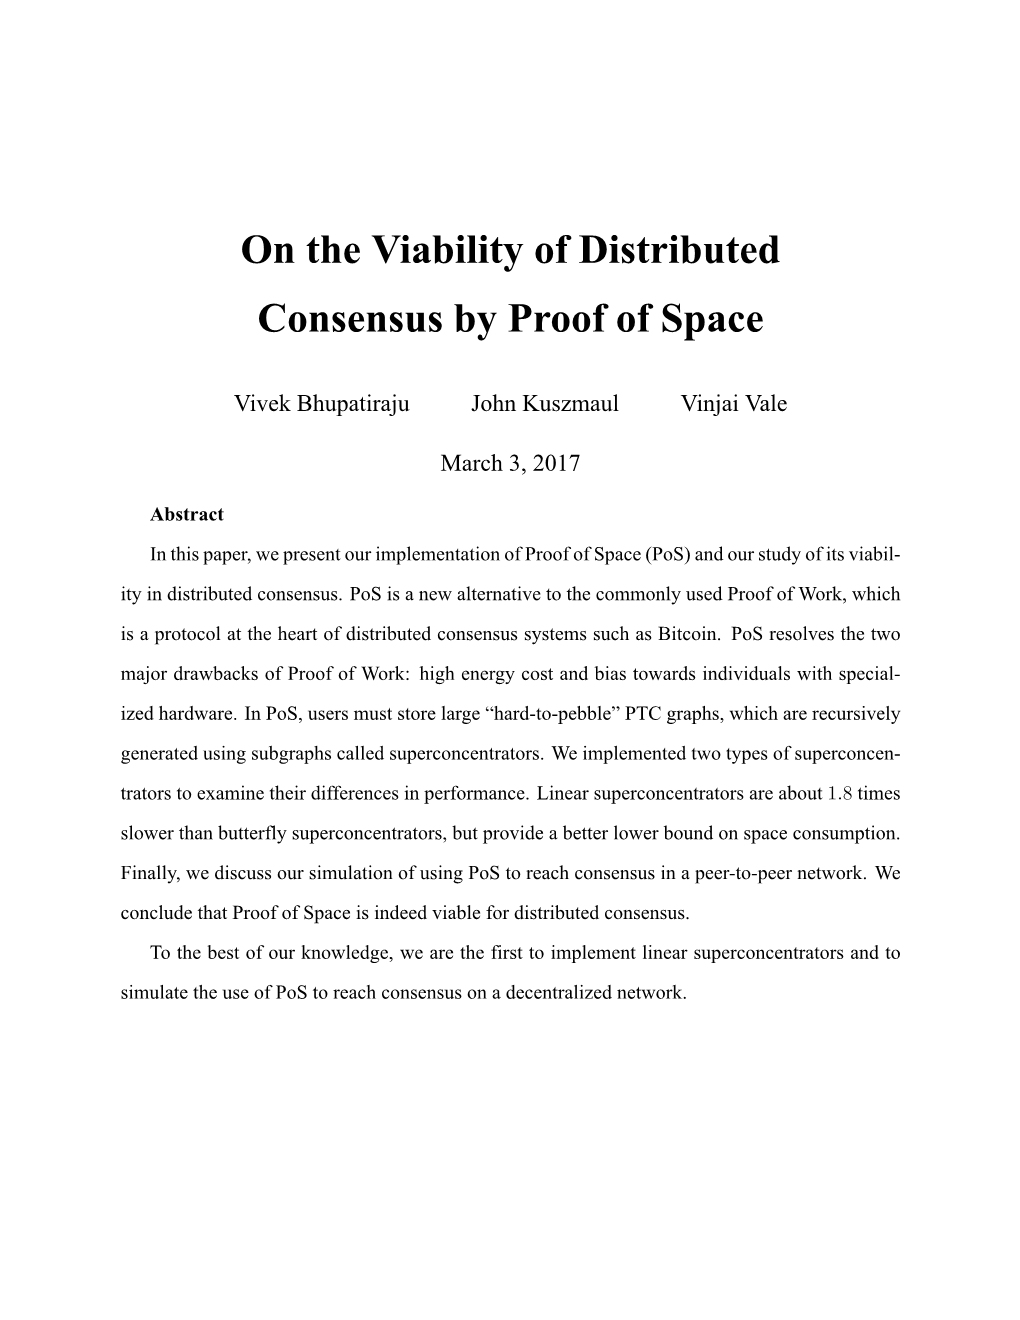 On the Viability of Distributed Consensus by Proof of Space